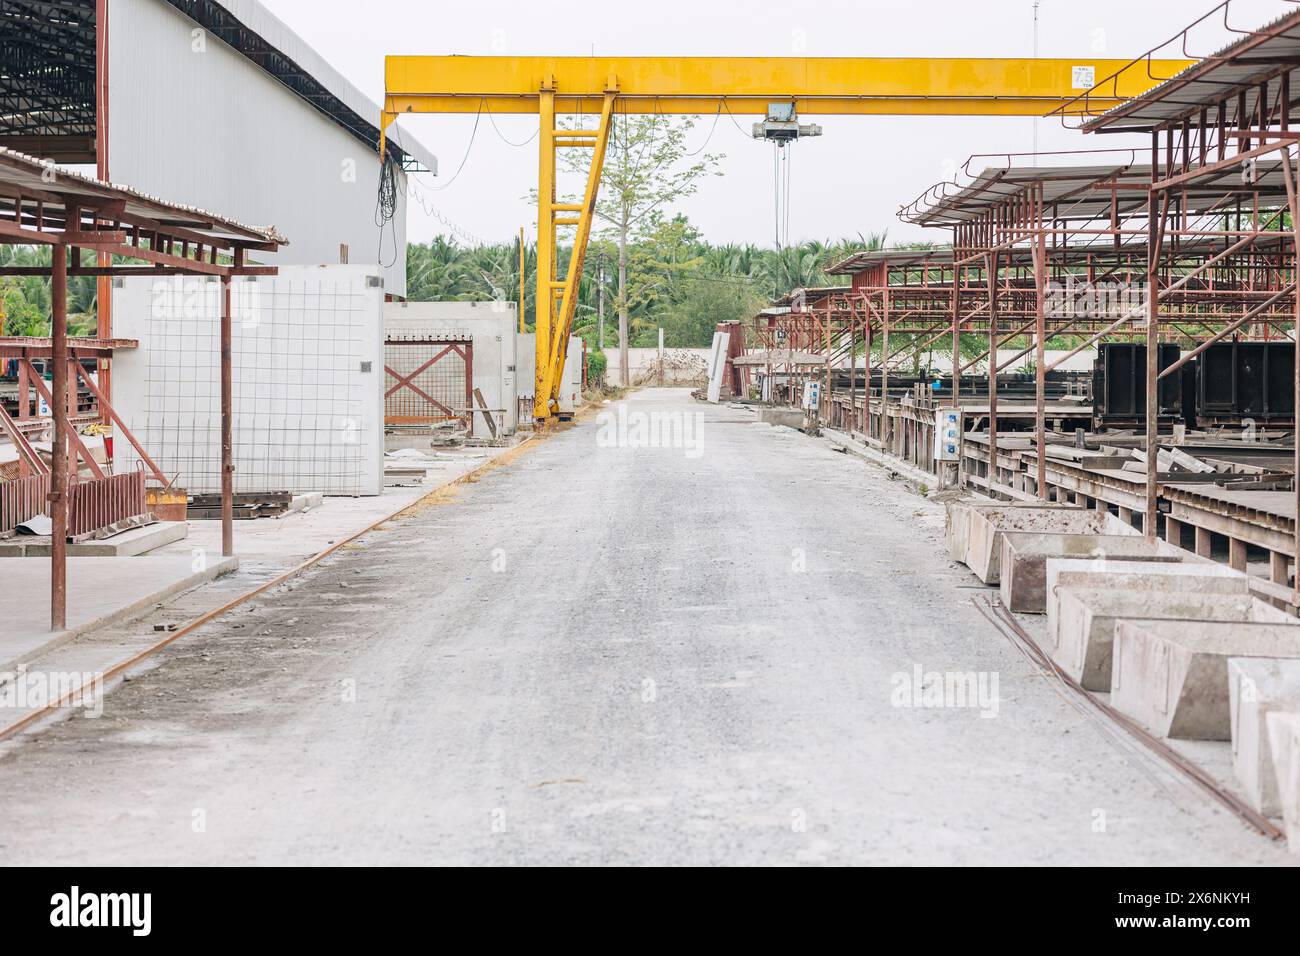 Precast concrete casting manufacturing plant, Cement products large construction site yard business industry. Stock Photo